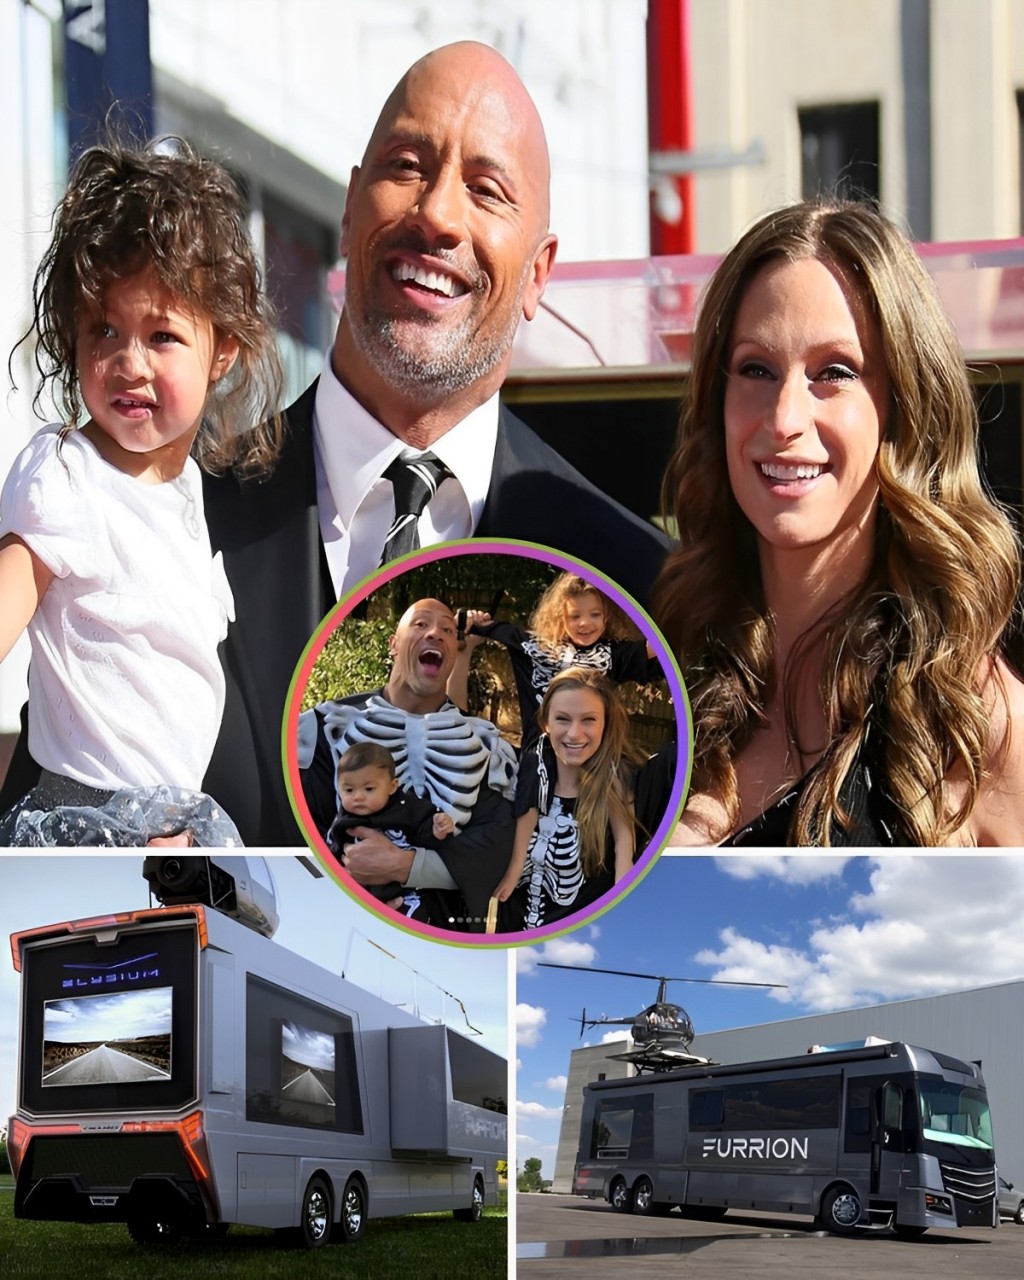 Cover Image for “The Rock”: A devoted husband and father who is endearing to both his wife and his 𝘤𝘩𝘪𝘭𝘥ren recently gifted his family a multimillion dollar family SUV that resembles a yacht.